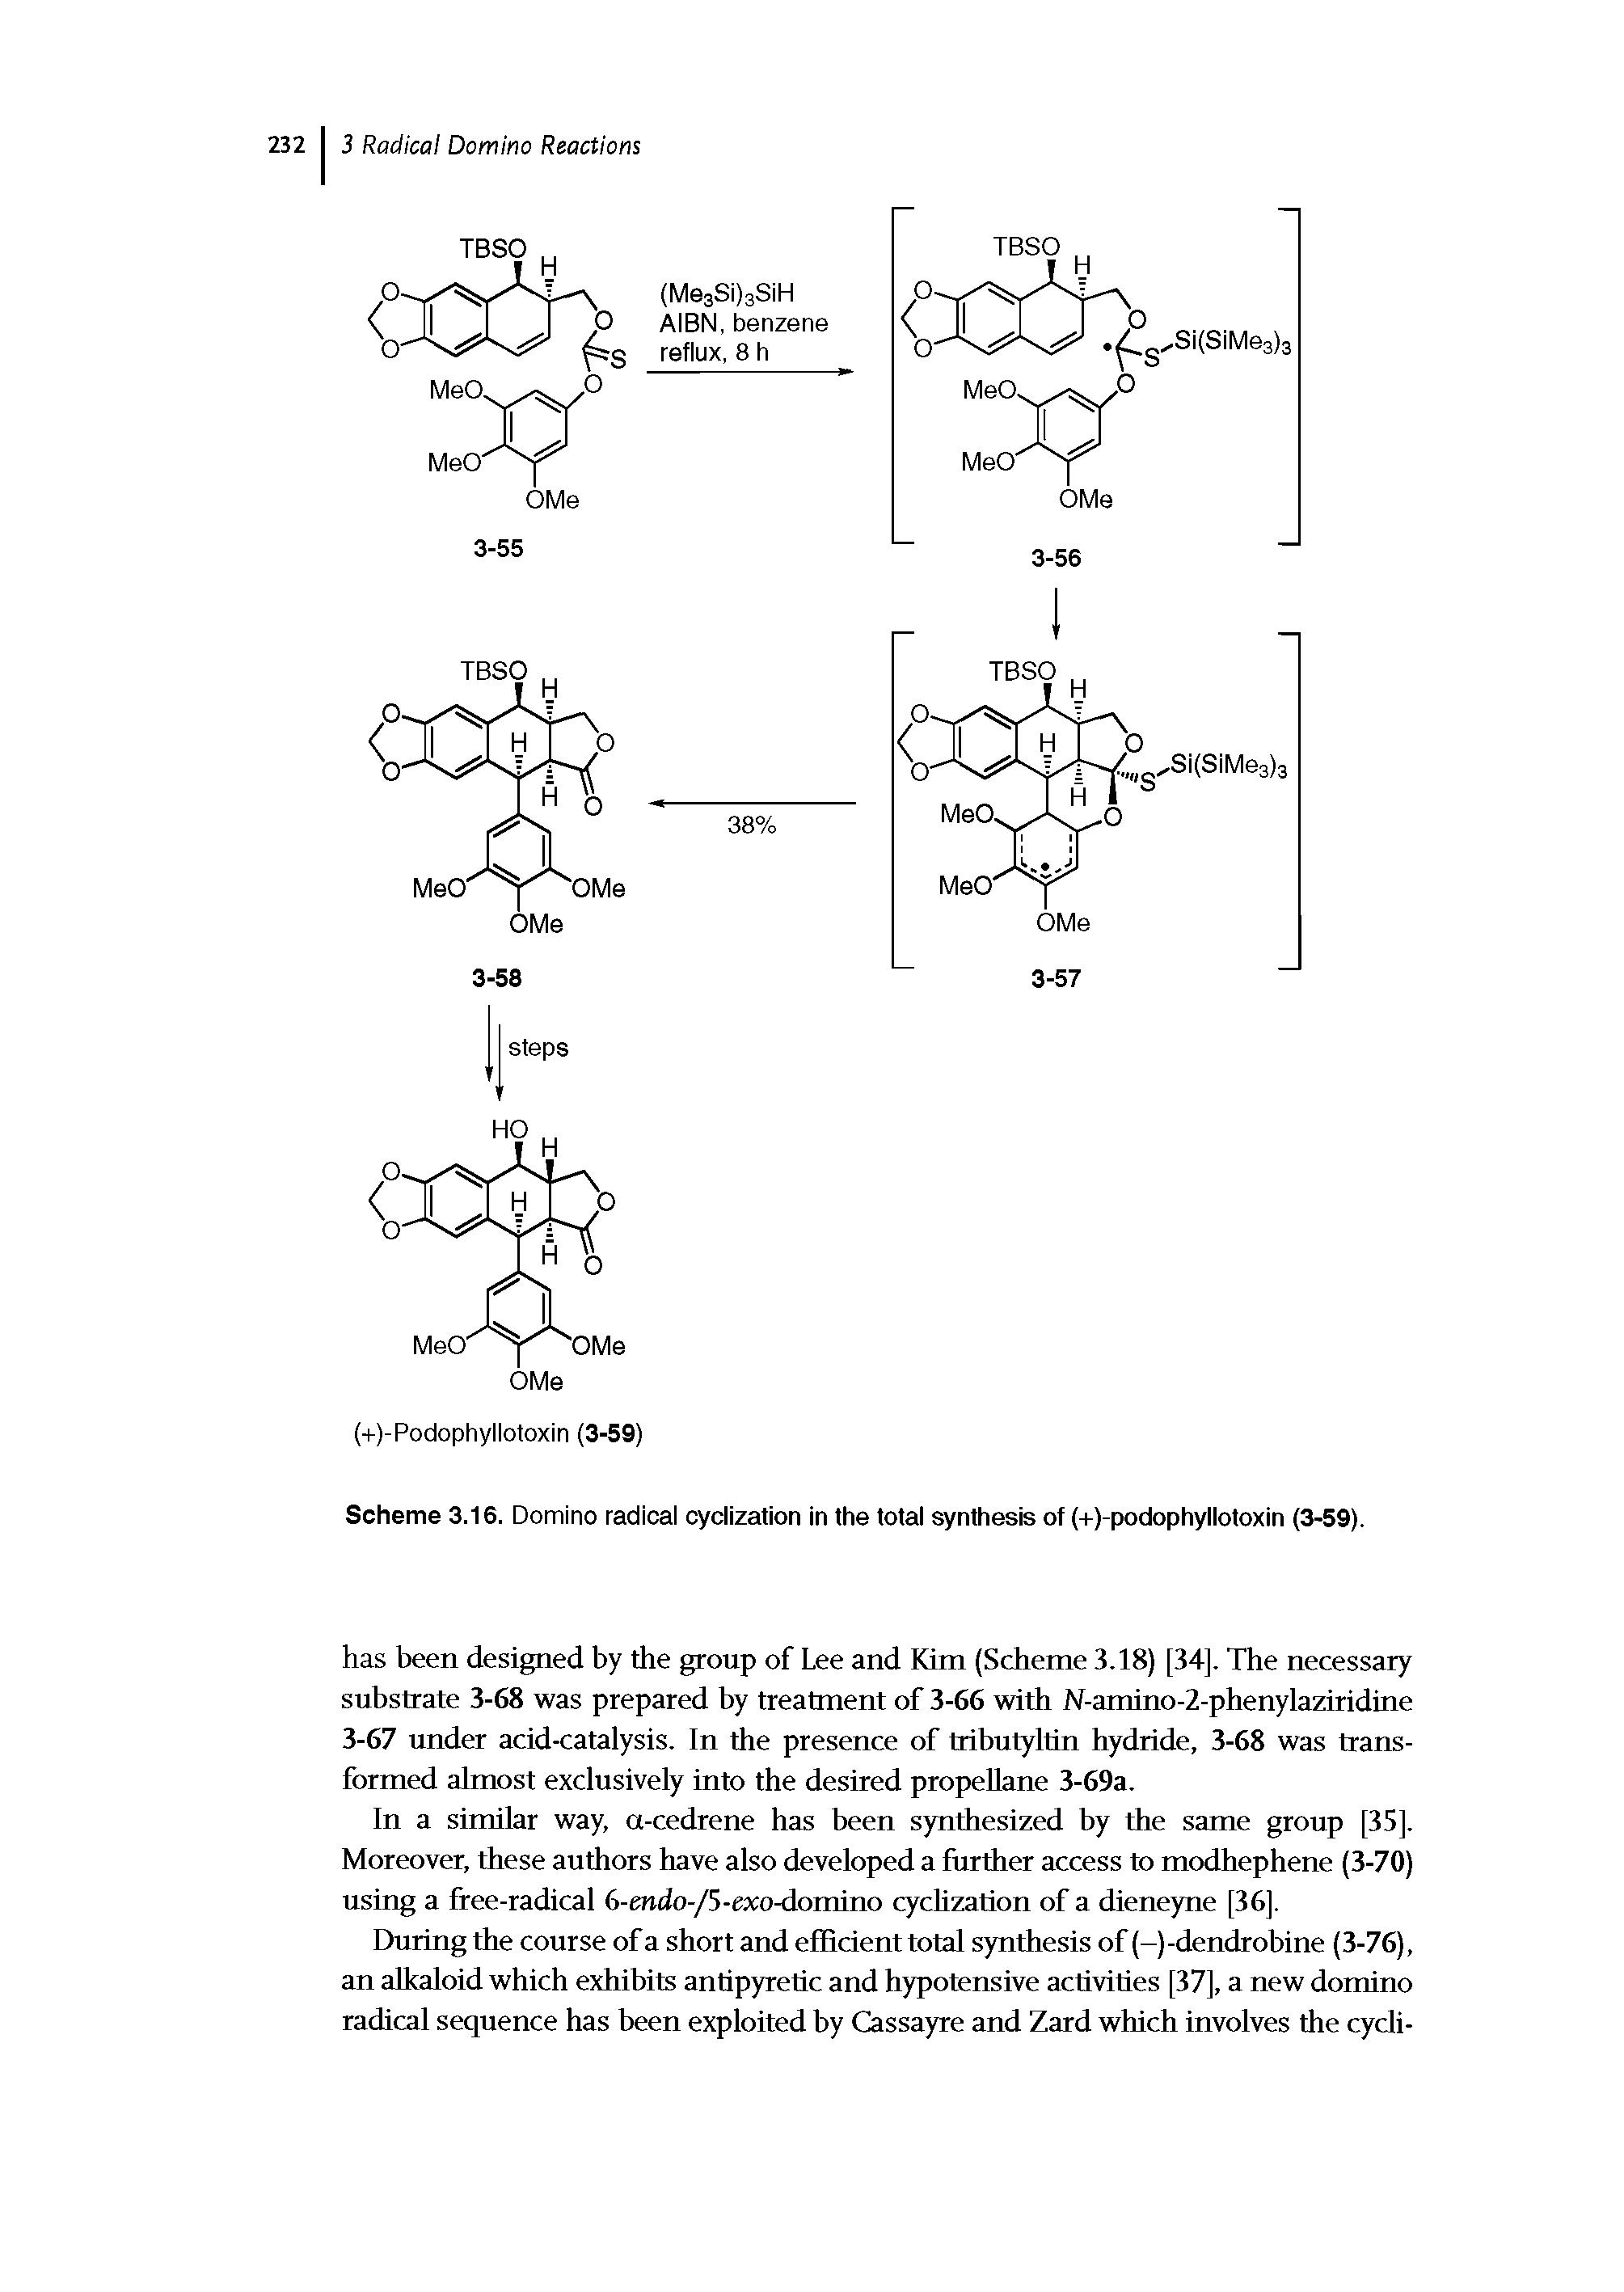 Scheme 3.16. Domino radical cyclization in the total synthesis of (+)-podophyllotoxin (3-59).